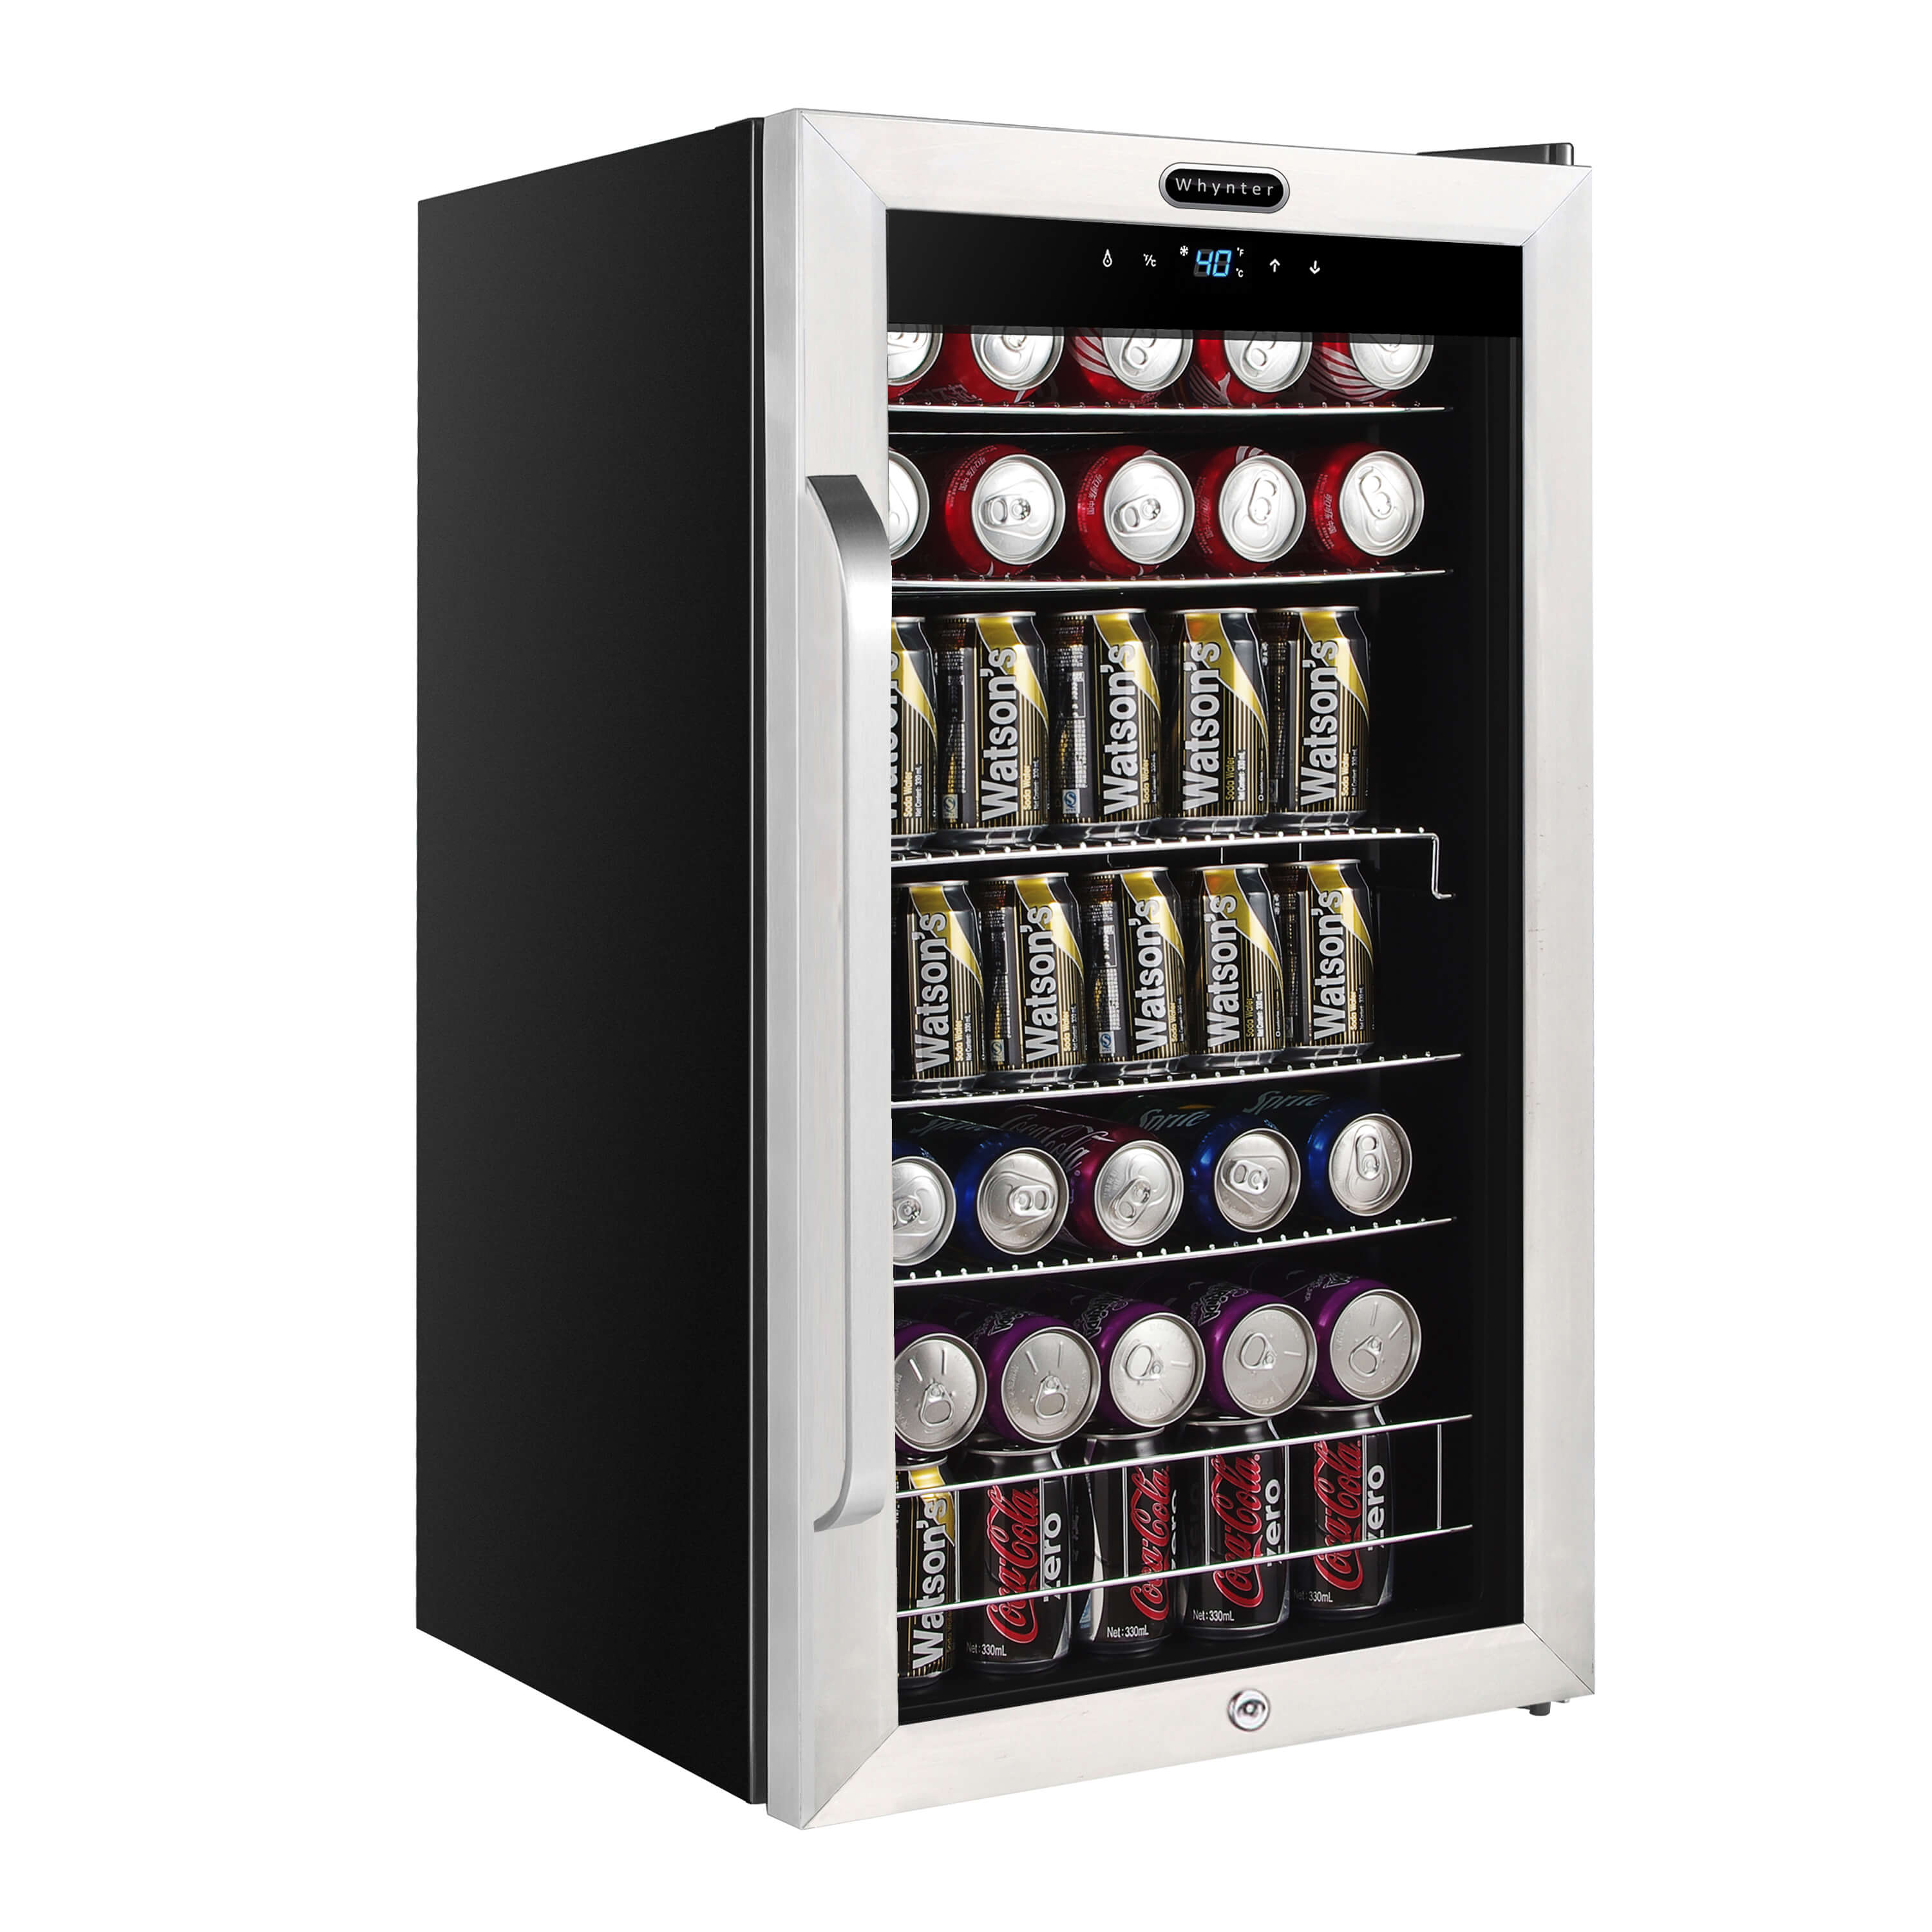 Whynter BR-1211DS Freestanding 121 Can Beverage Refrigerator with Digital Con 